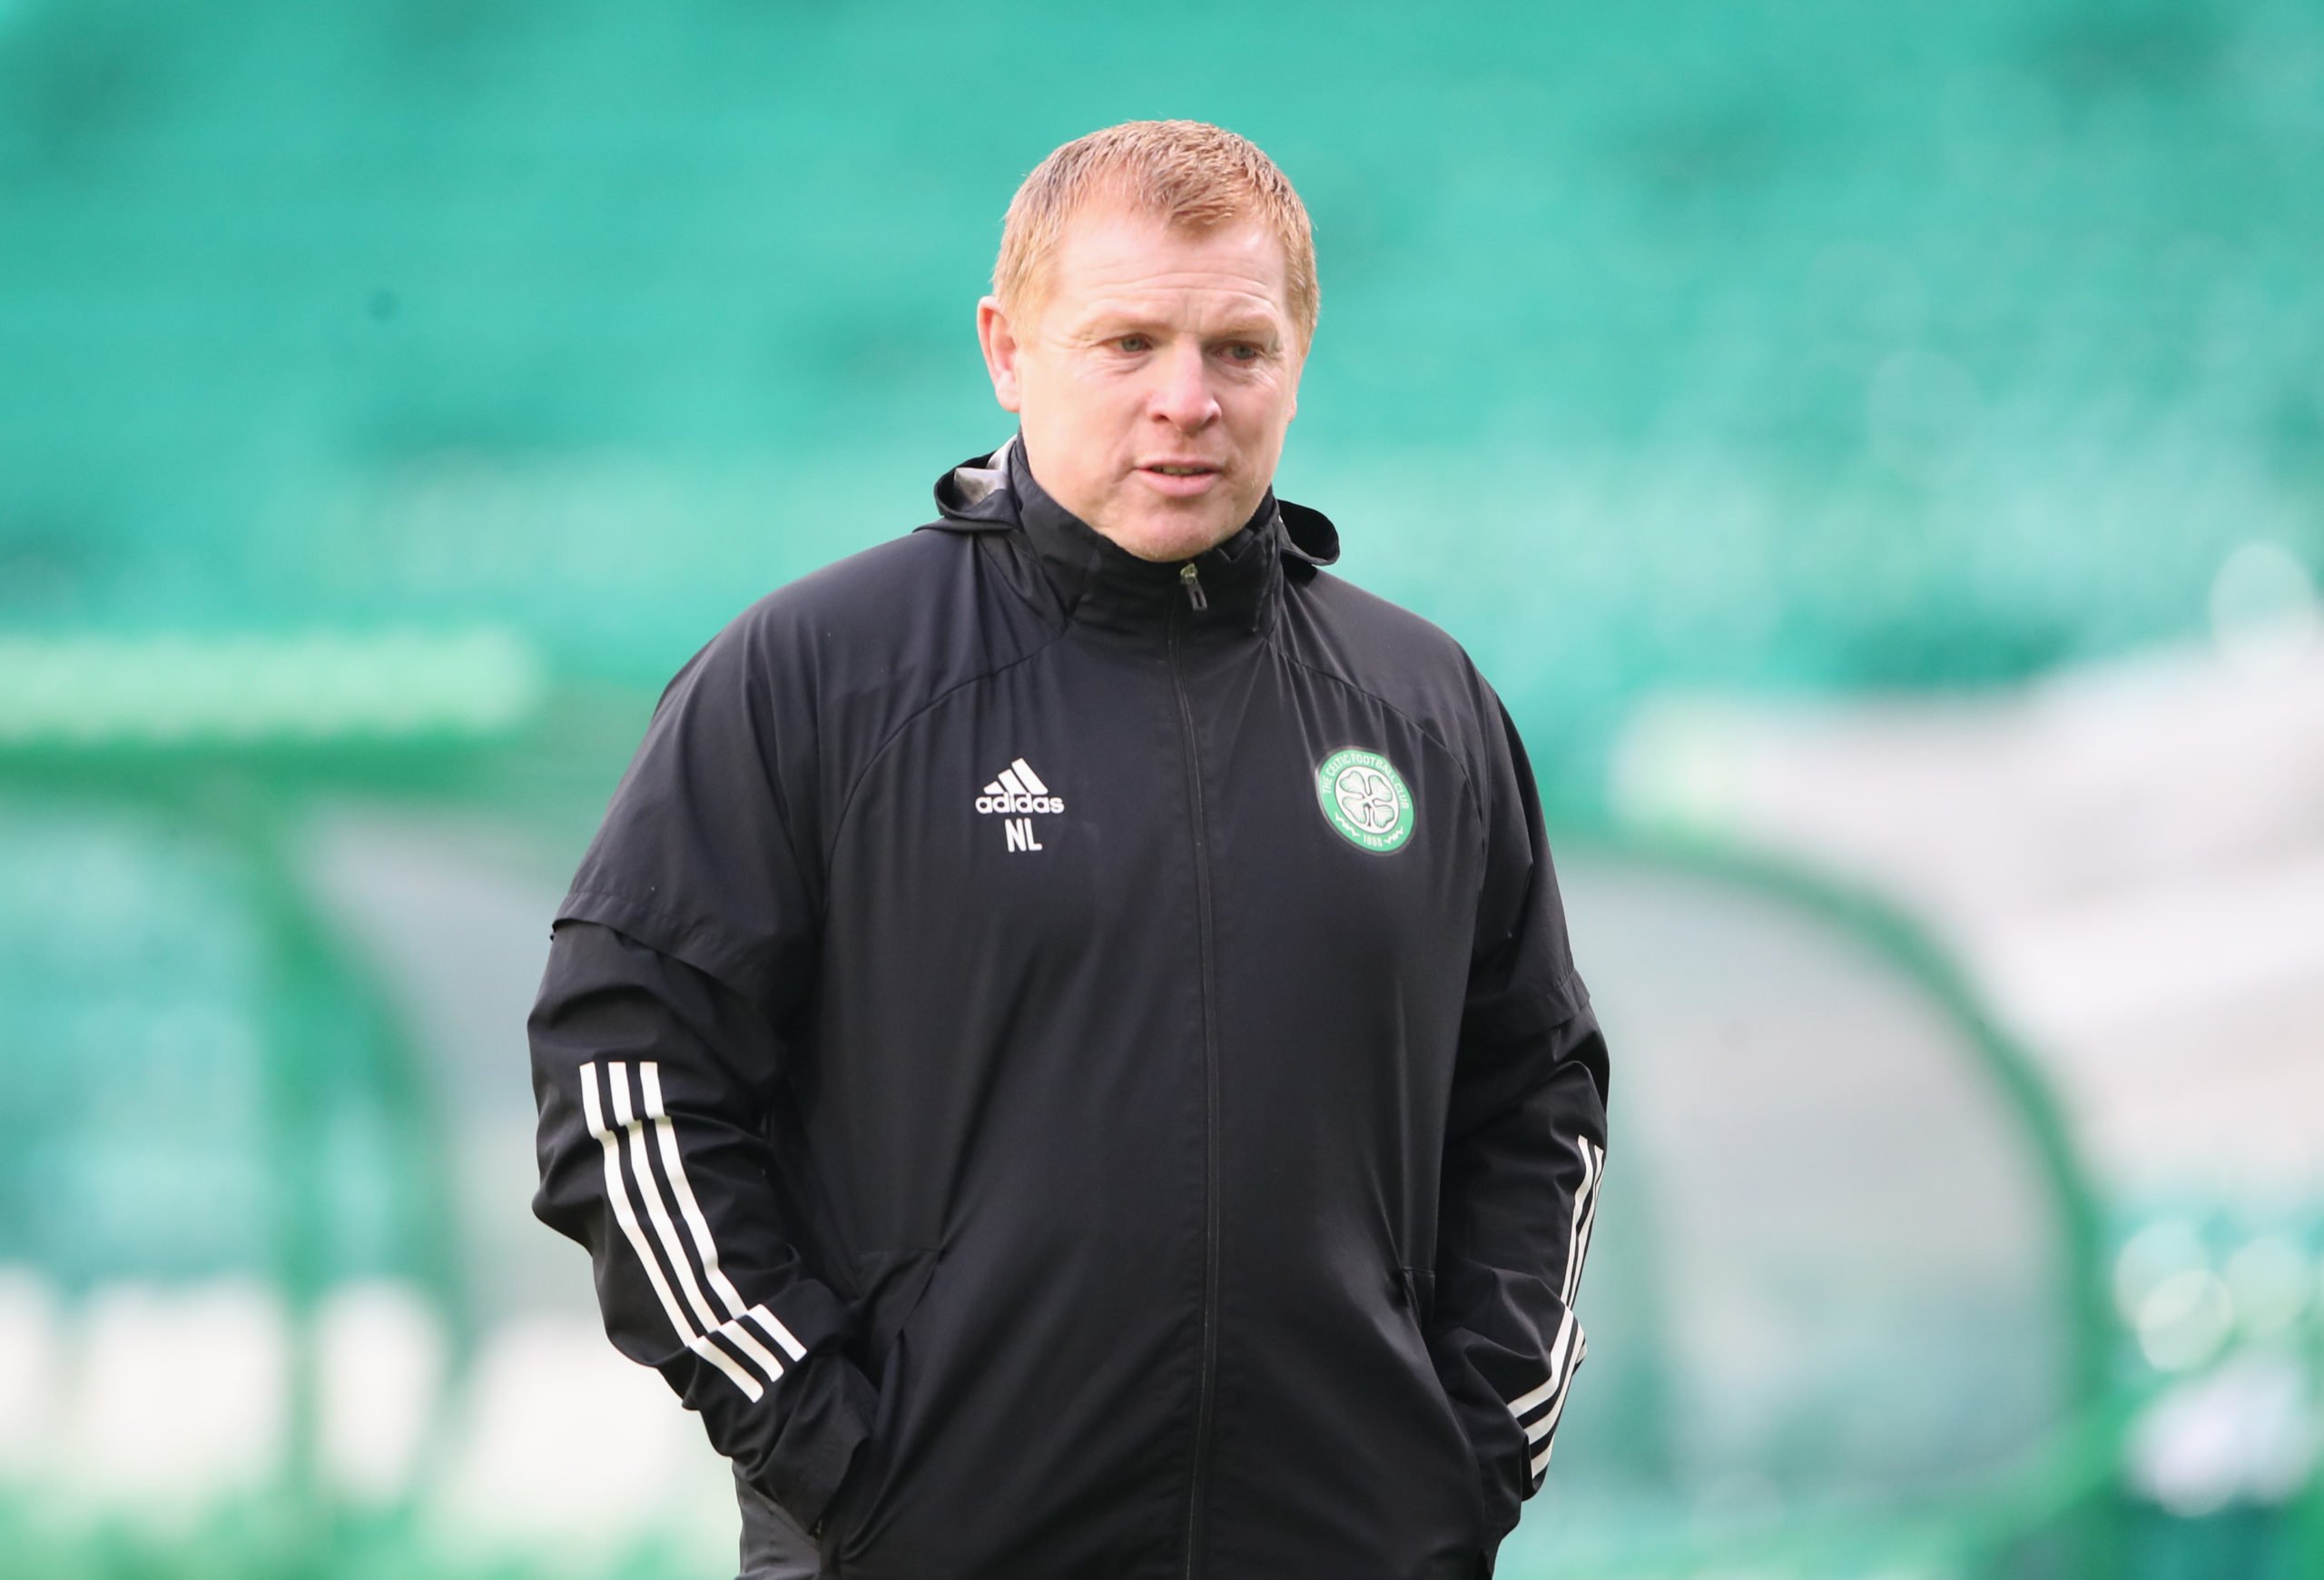 "You're asking all these negative questions" - Neil Lennon loses patience with BBC reporter after Celtic draw